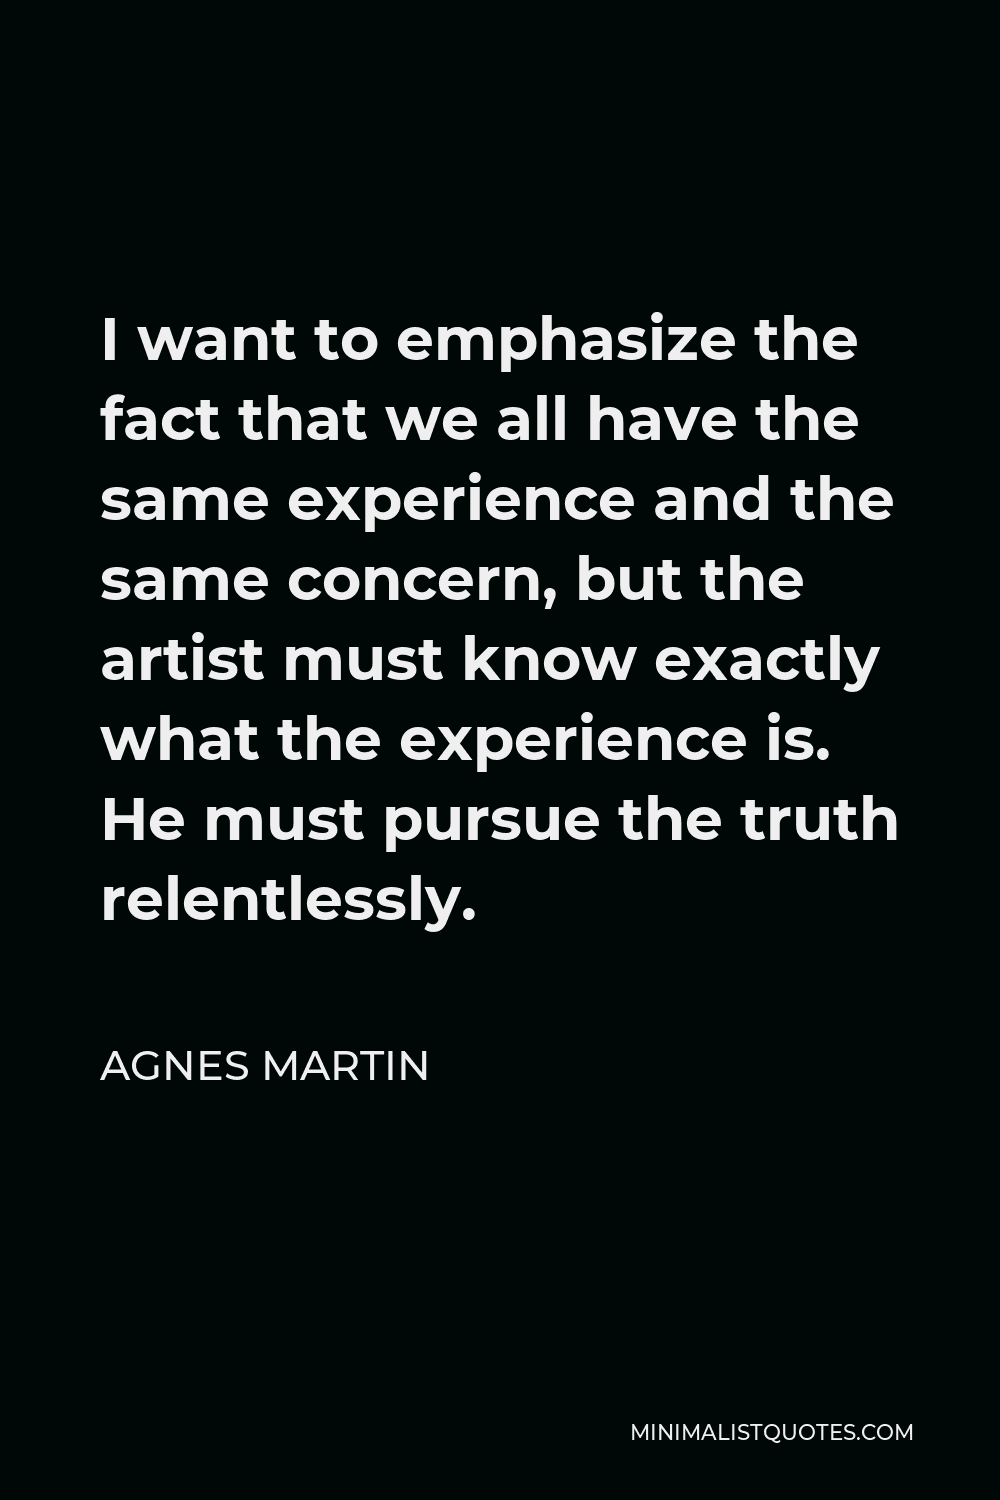 Agnes Martin Quote - I want to emphasize the fact that we all have the same experience and the same concern, but the artist must know exactly what the experience is. He must pursue the truth relentlessly.